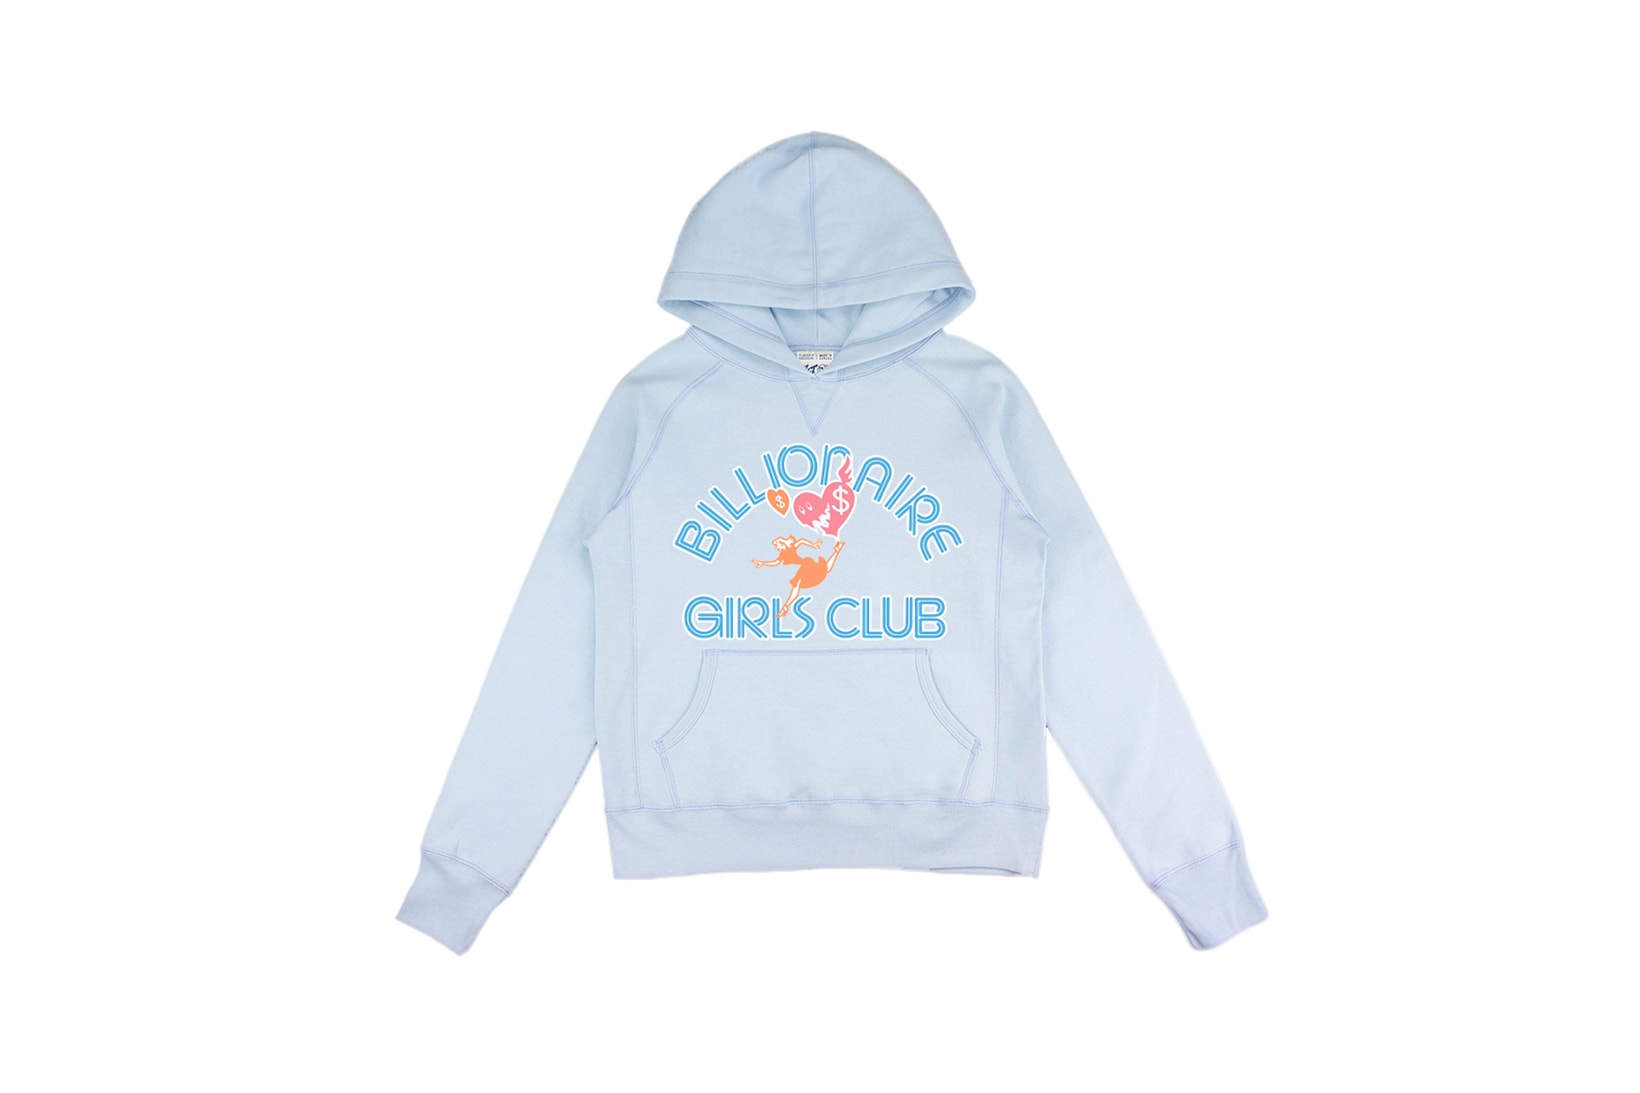 Billionaire Girls Club Relaunch Capsule Collection Hoodie Blue